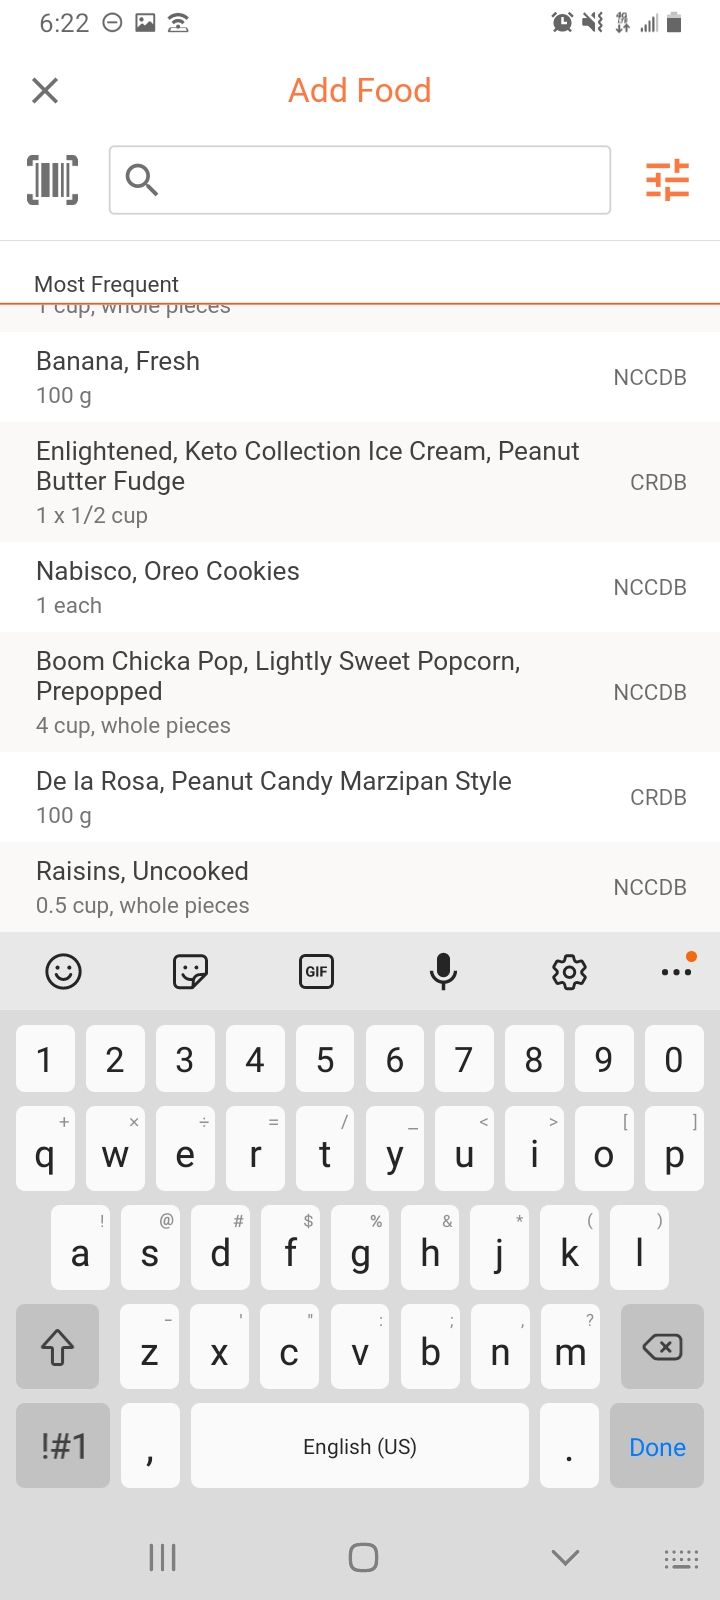 Adding a food diary entry in Chronometer